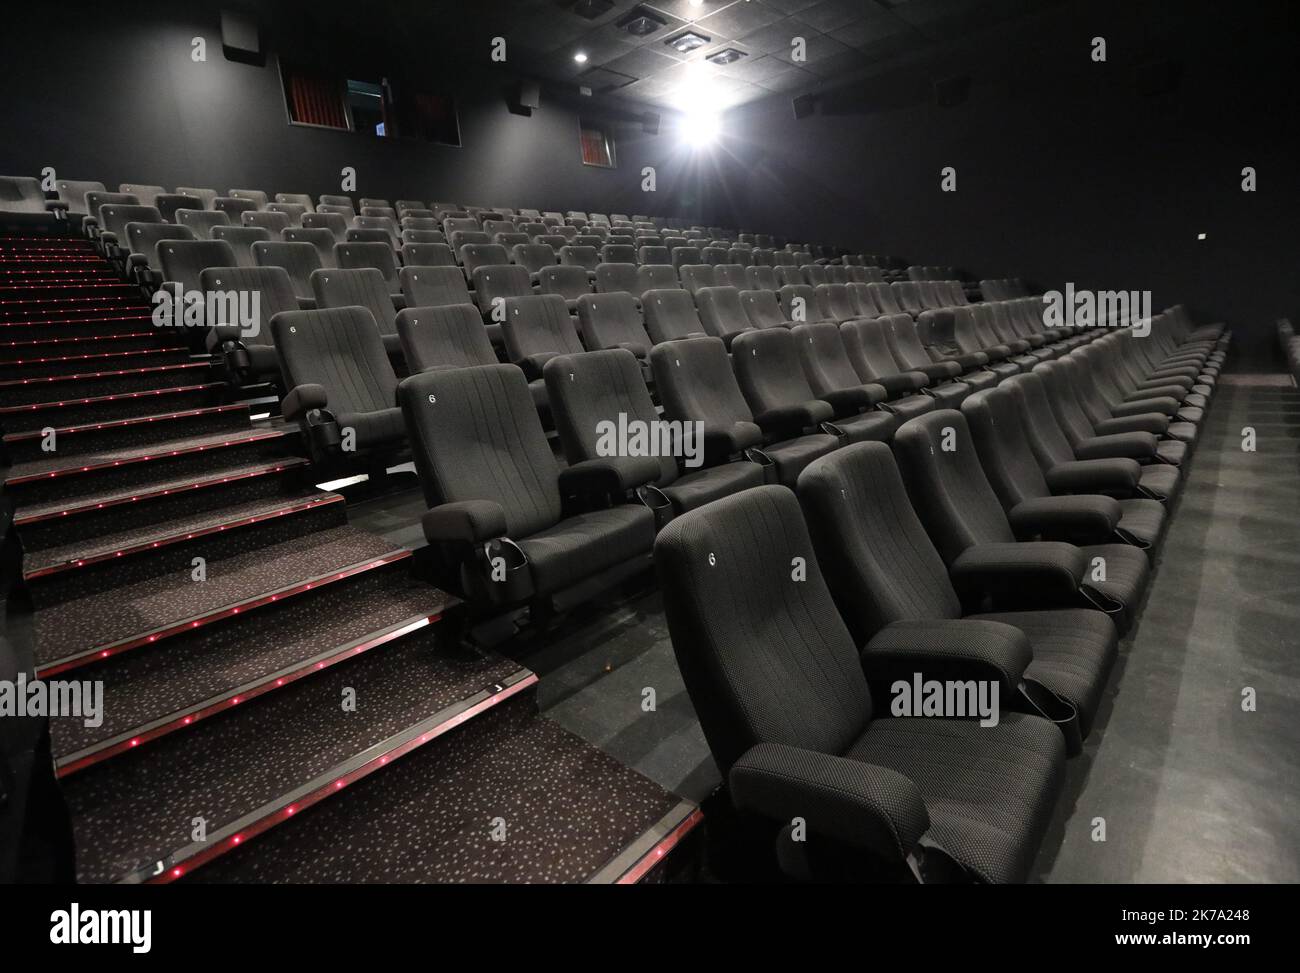 France, june 18th 2020 - Cinemas are getting ready for reopening after covid-19 pandemic Stock Photo